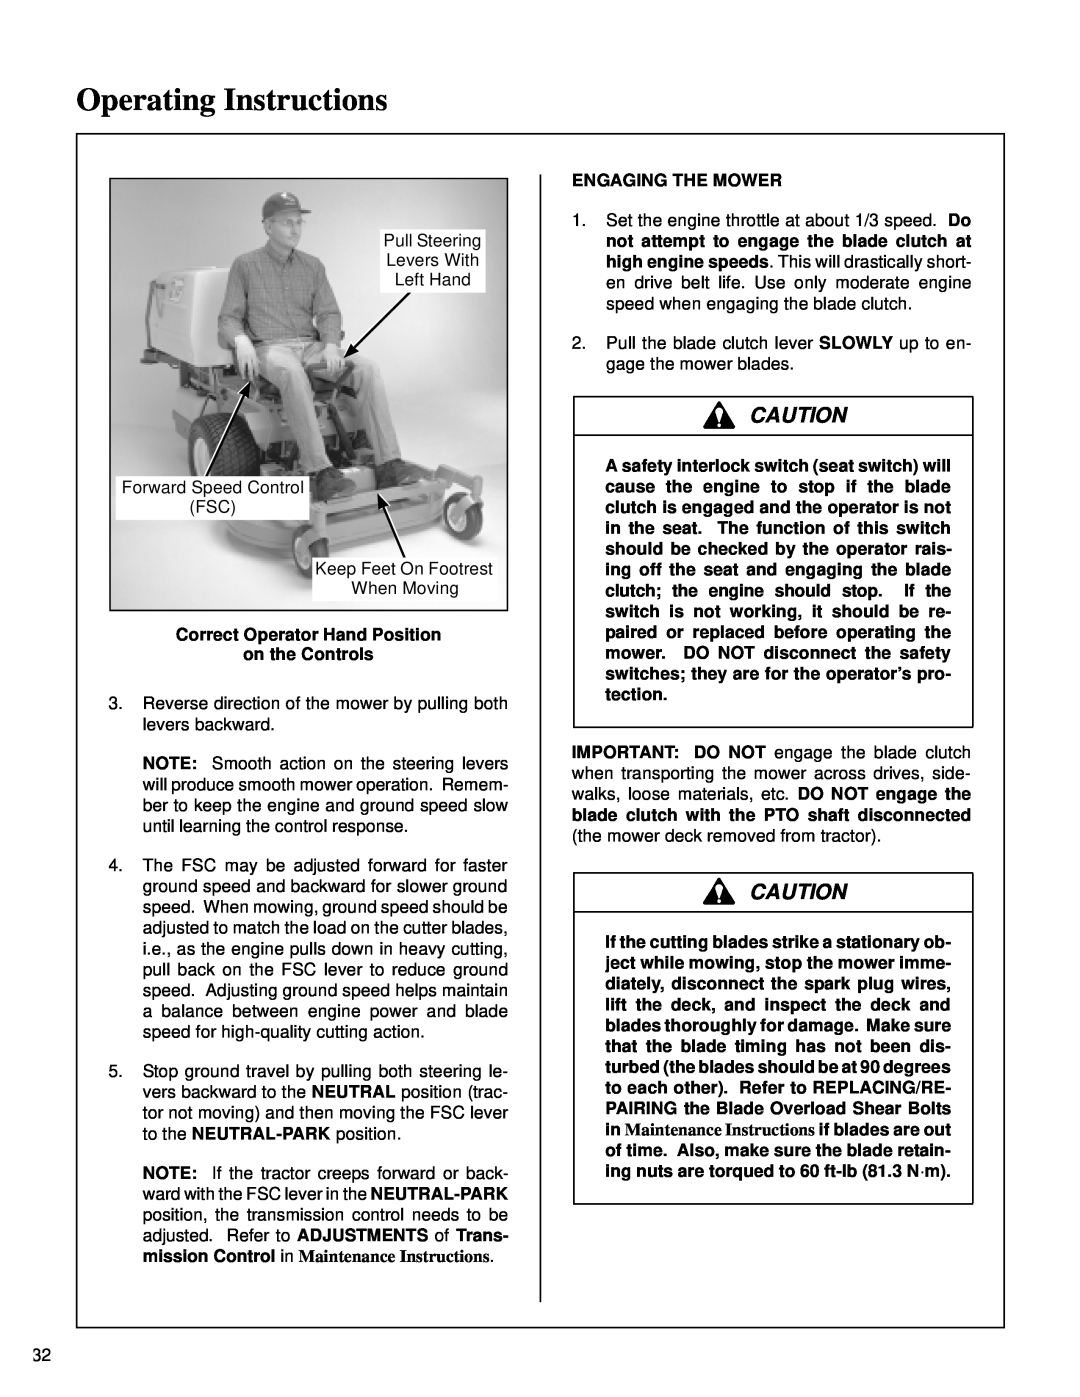 Walker MT owner manual Operating Instructions, Correct Operator Hand Position on the Controls, Engaging The Mower 